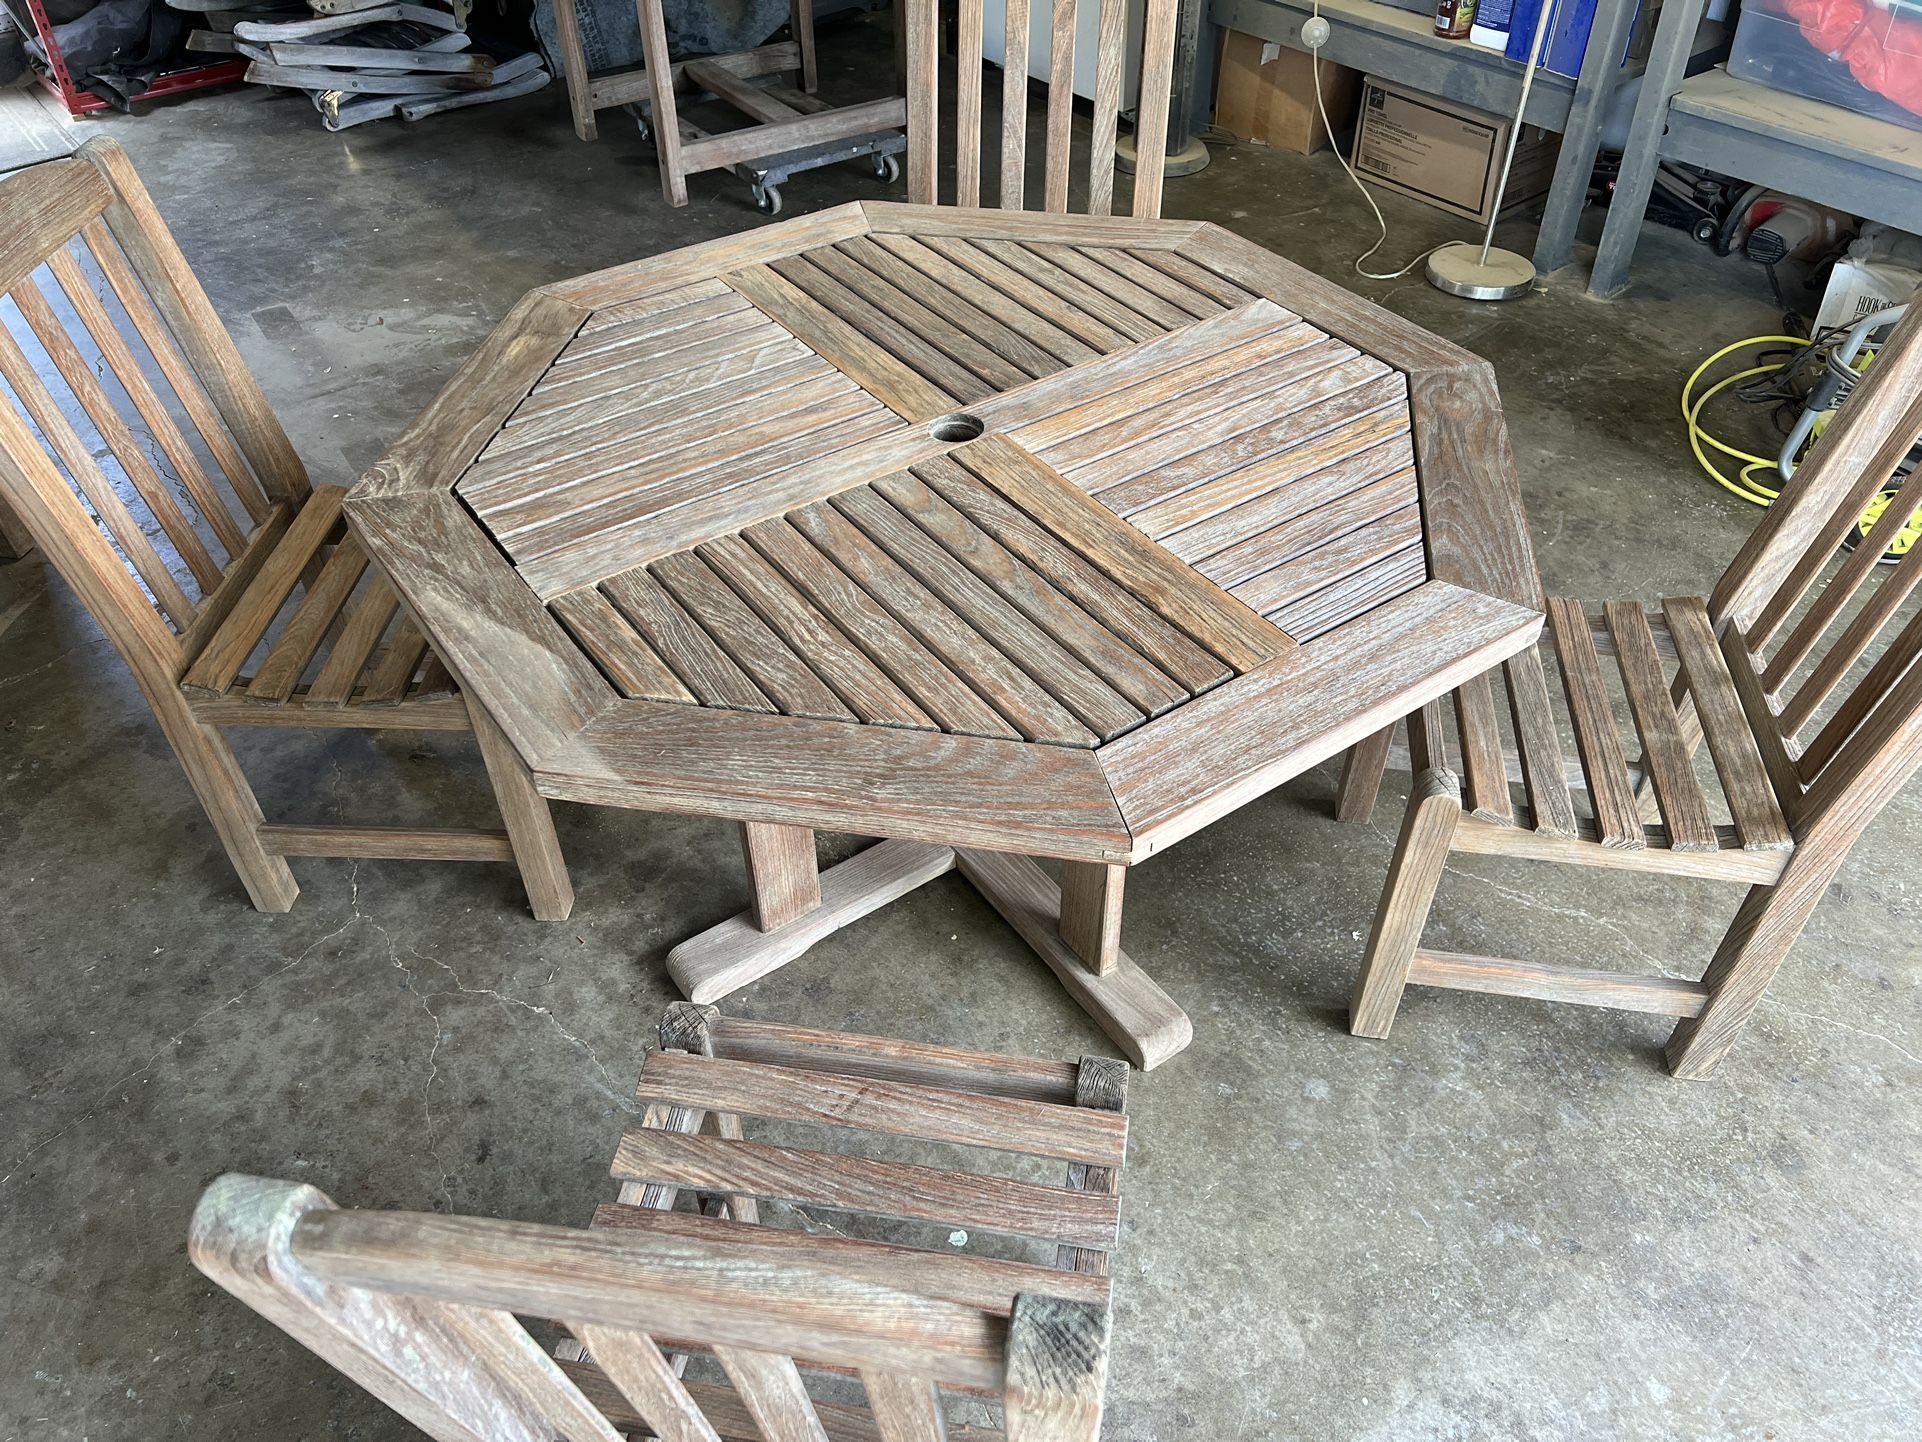 Vintage Smith And Hawken Octagon Teak Table With Matching 4 Teak Chairs